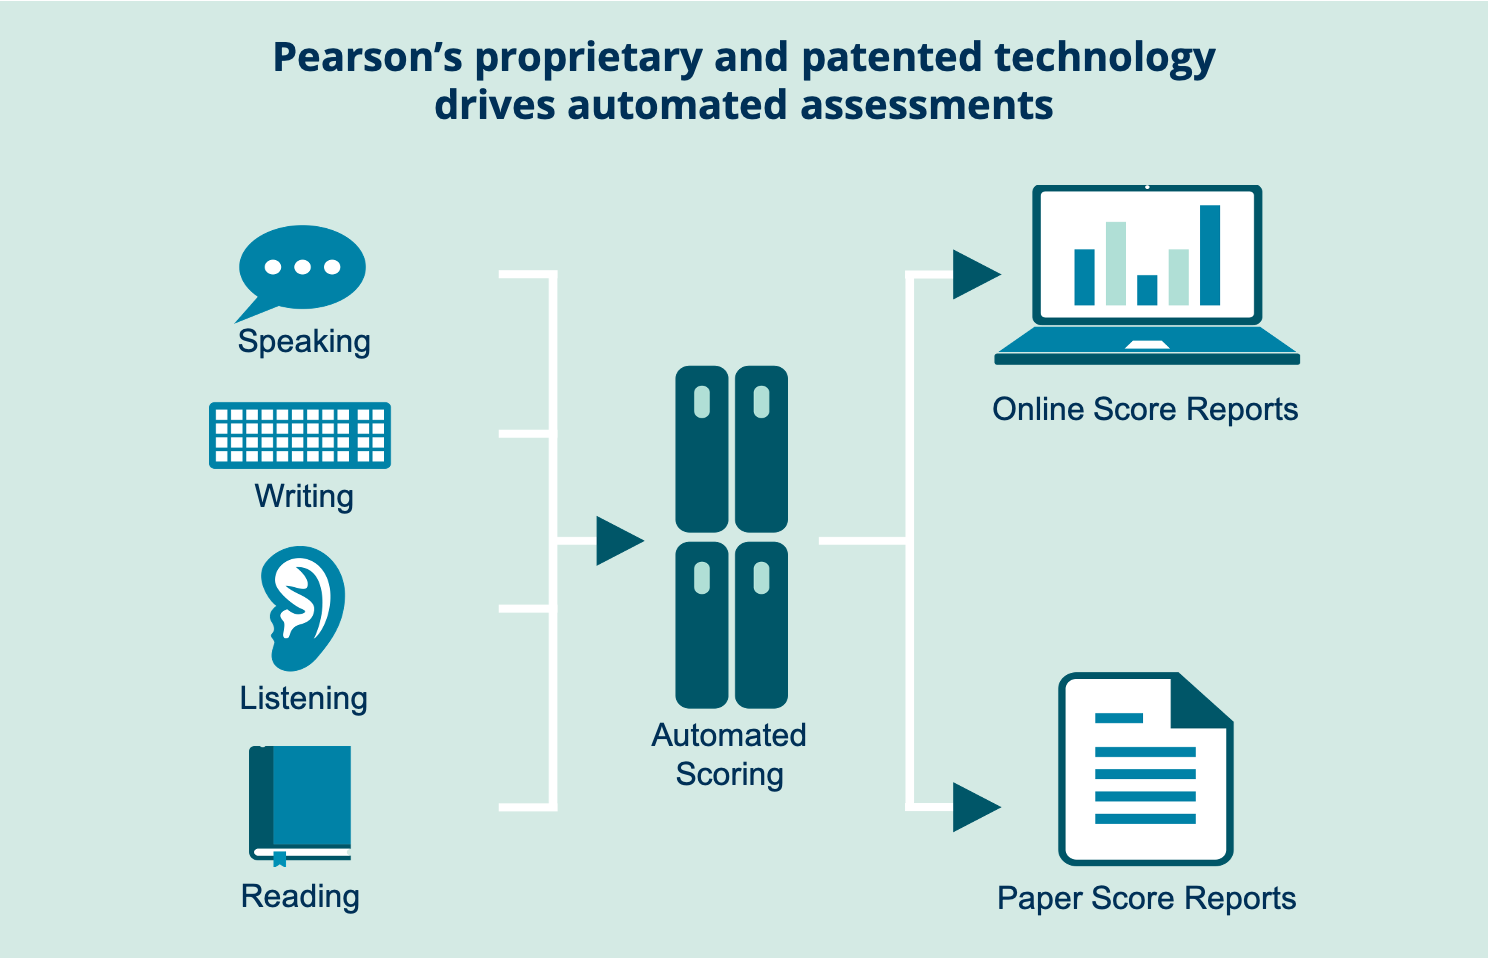 Versant technology infographic, showing speaking, writing, listening  and reading tests going through automated scoring to produce online and paper score reports